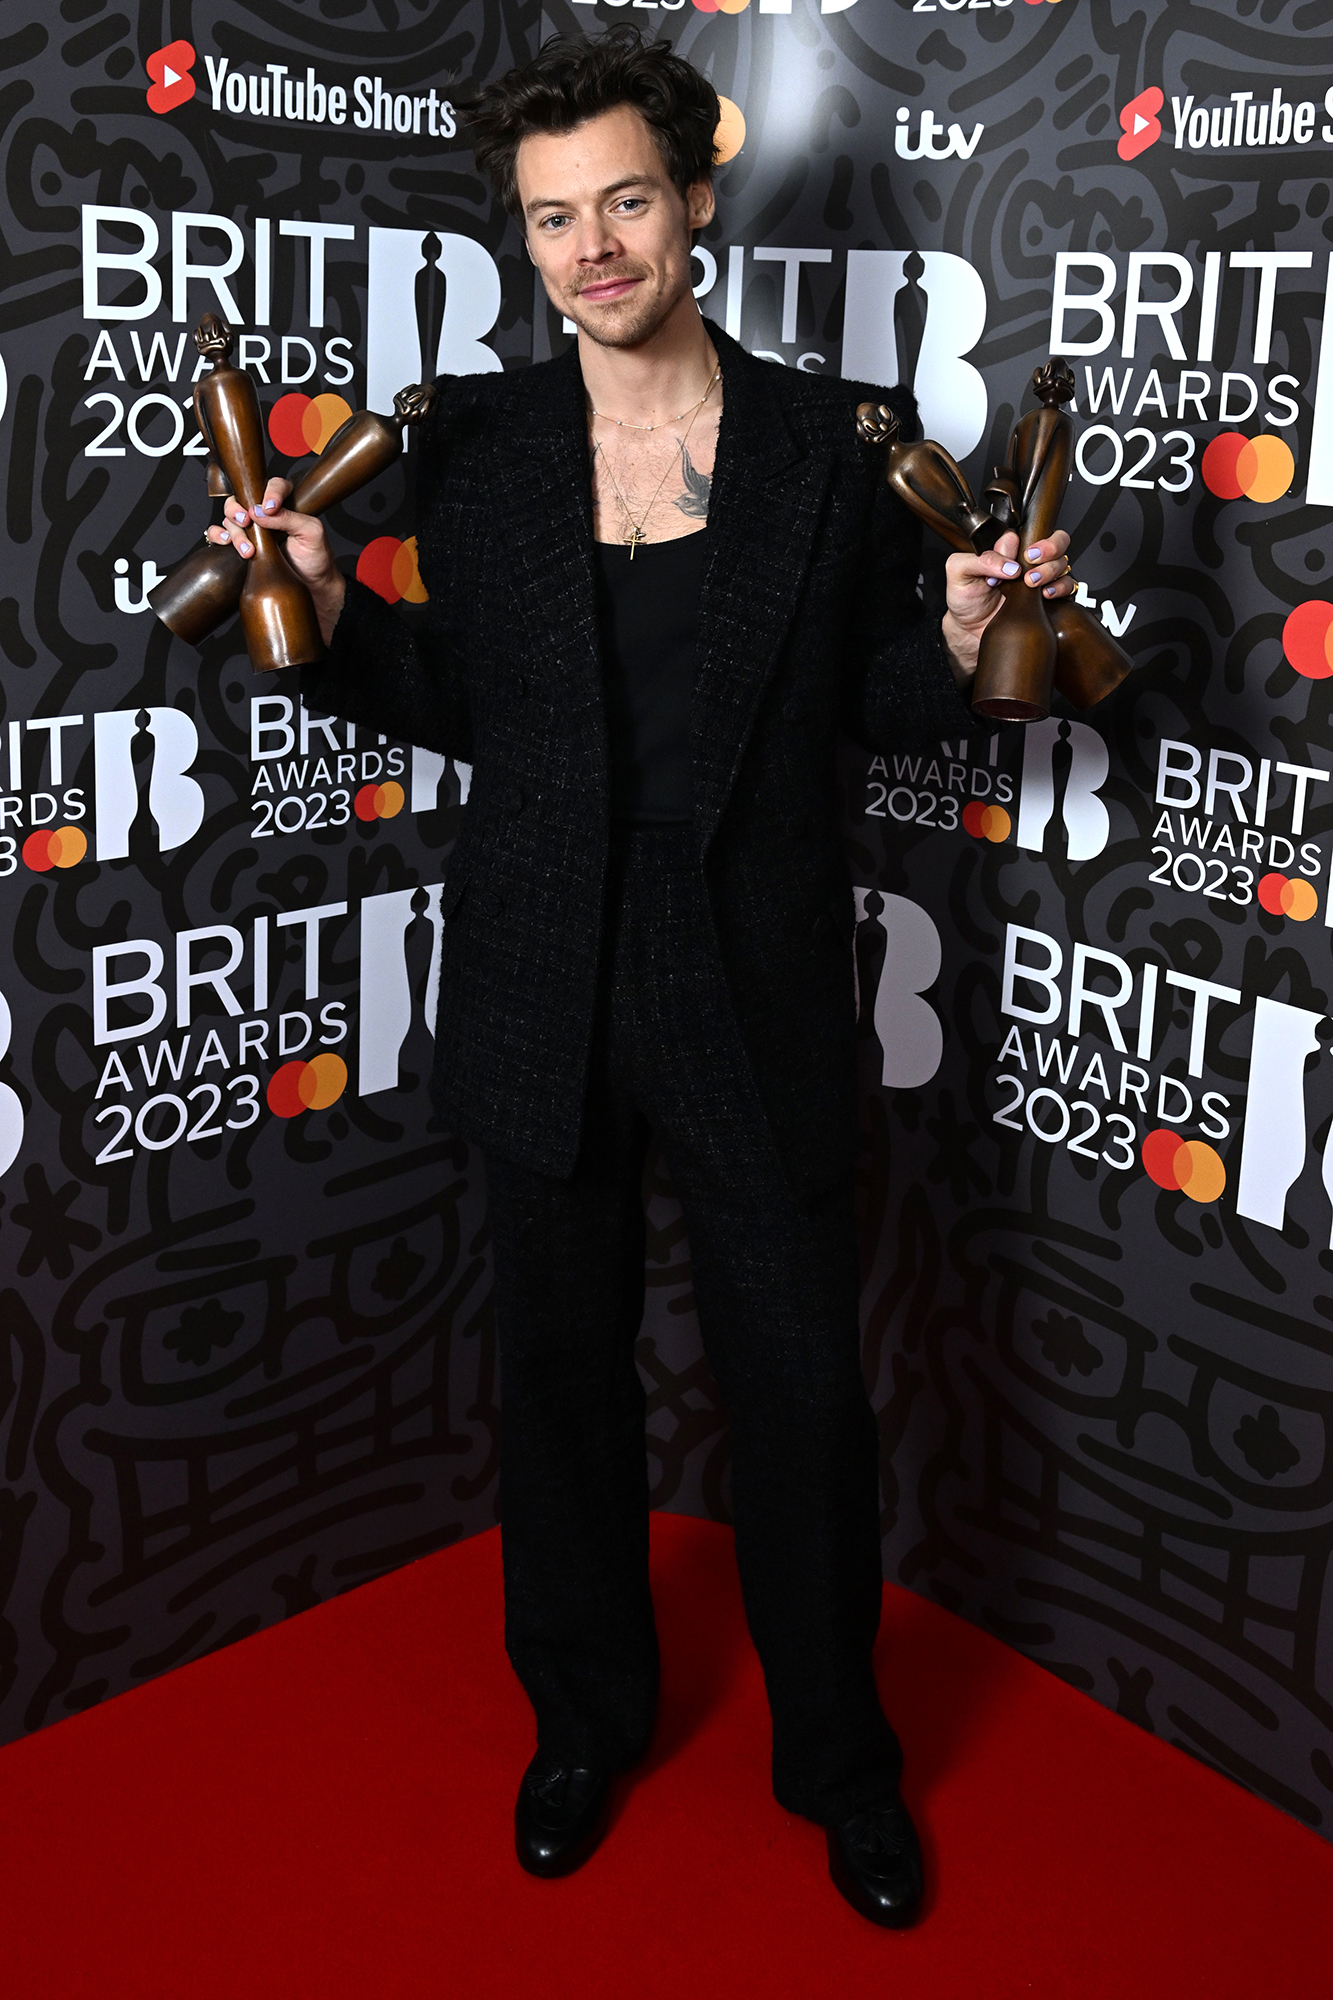 Brit Awards 2023: Harry Styles' Best Moments, Stylish Outfits | Us Weekly